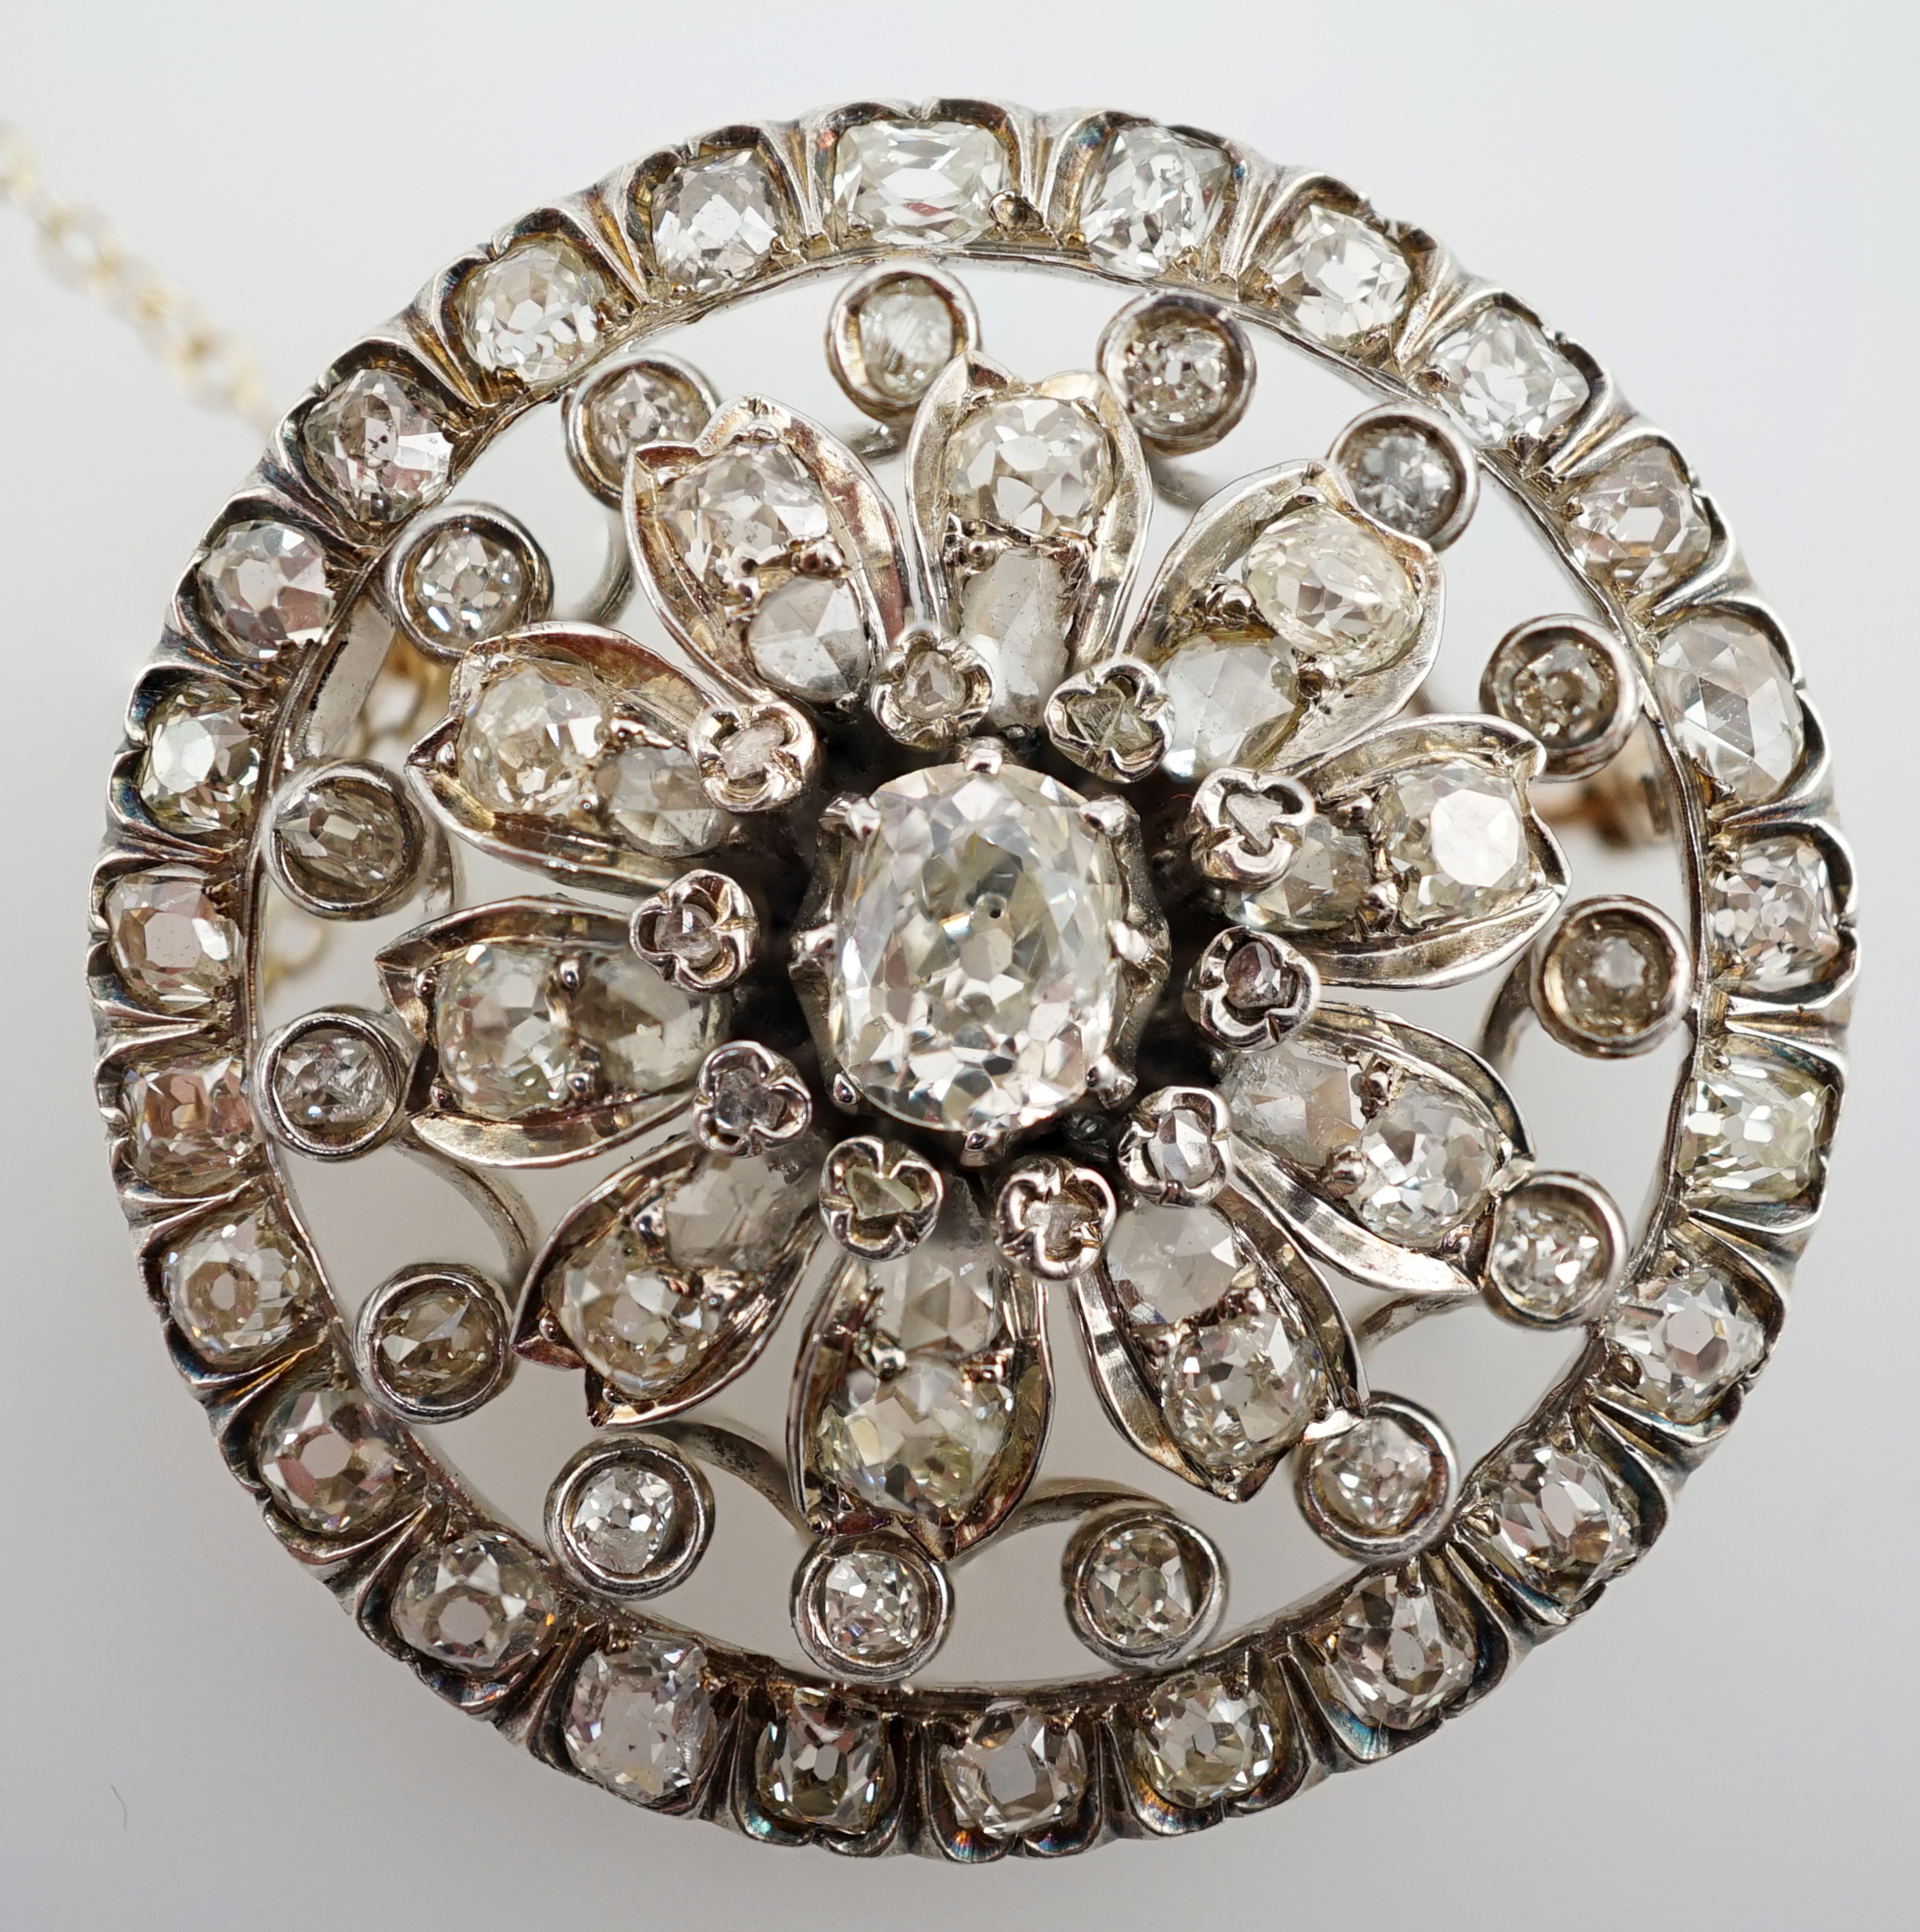 An Edwardian pierced gold and diamond cluster set circular brooch, with central cushion cut stone, diameter 34mm, gross weight 14.4 grams. Condition - fair to good